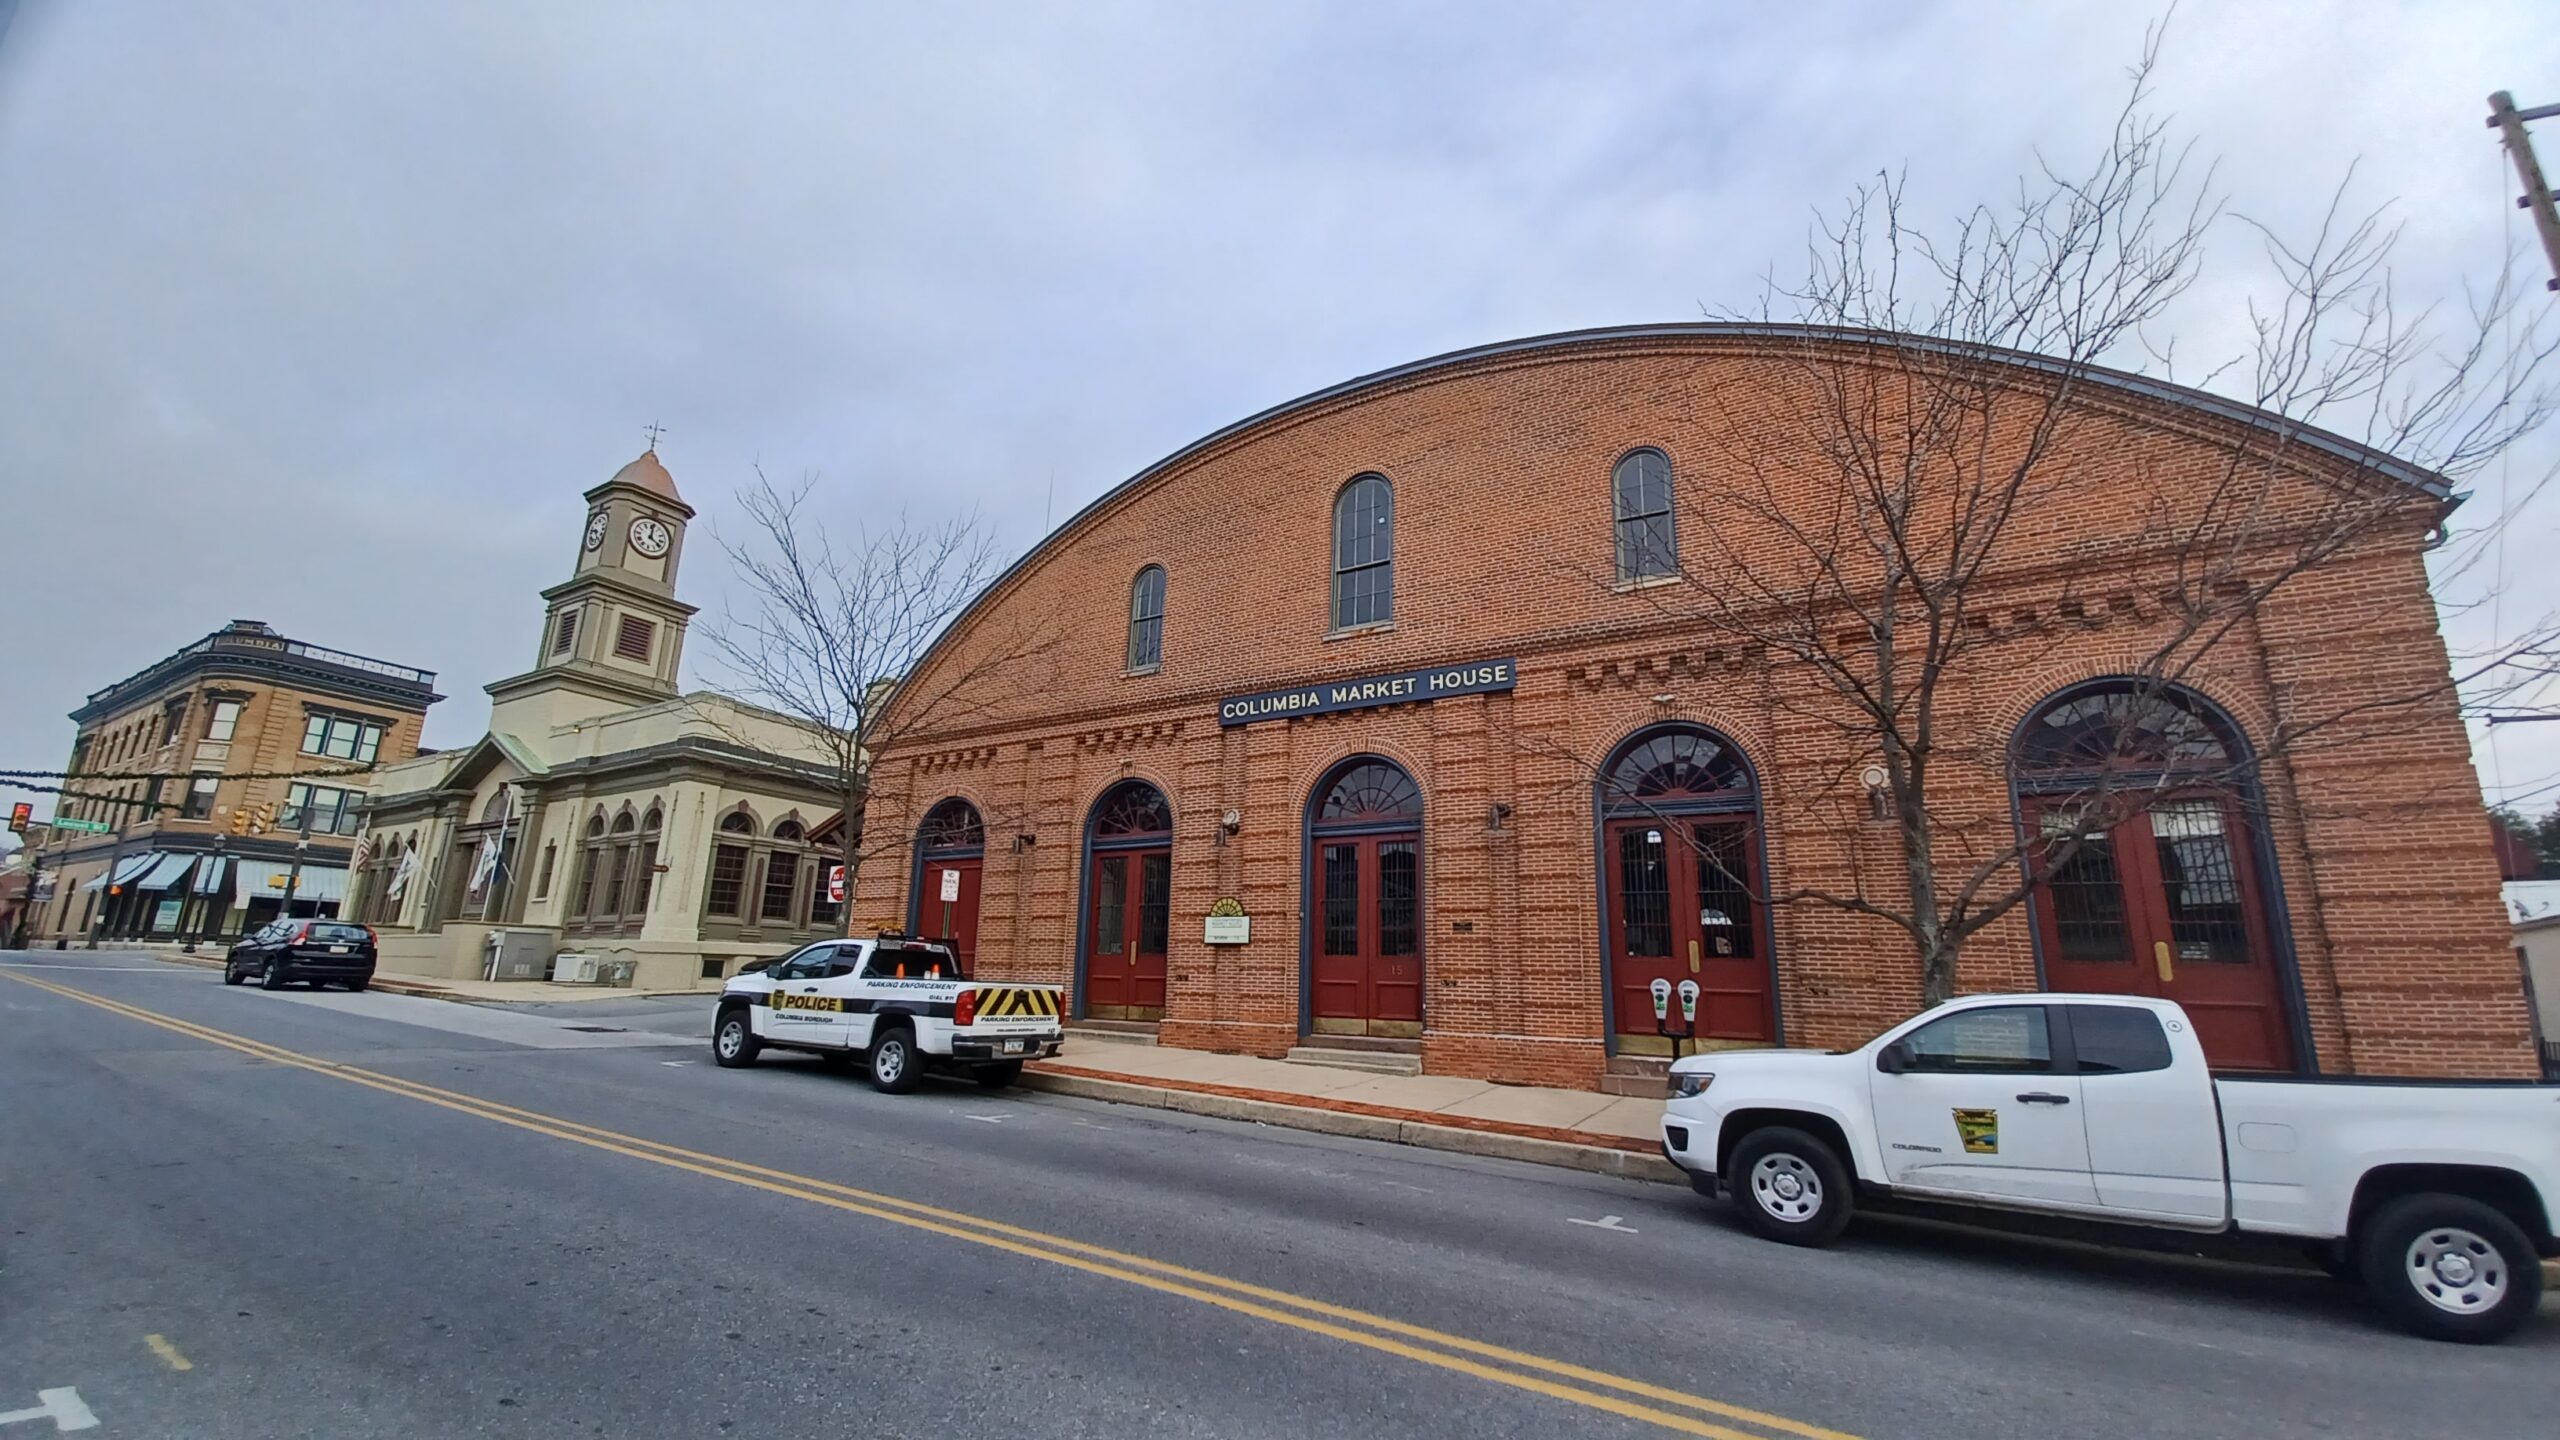 Streetscape in borough with large brick building with arched roof, building with a steeple, and three-story brick building.